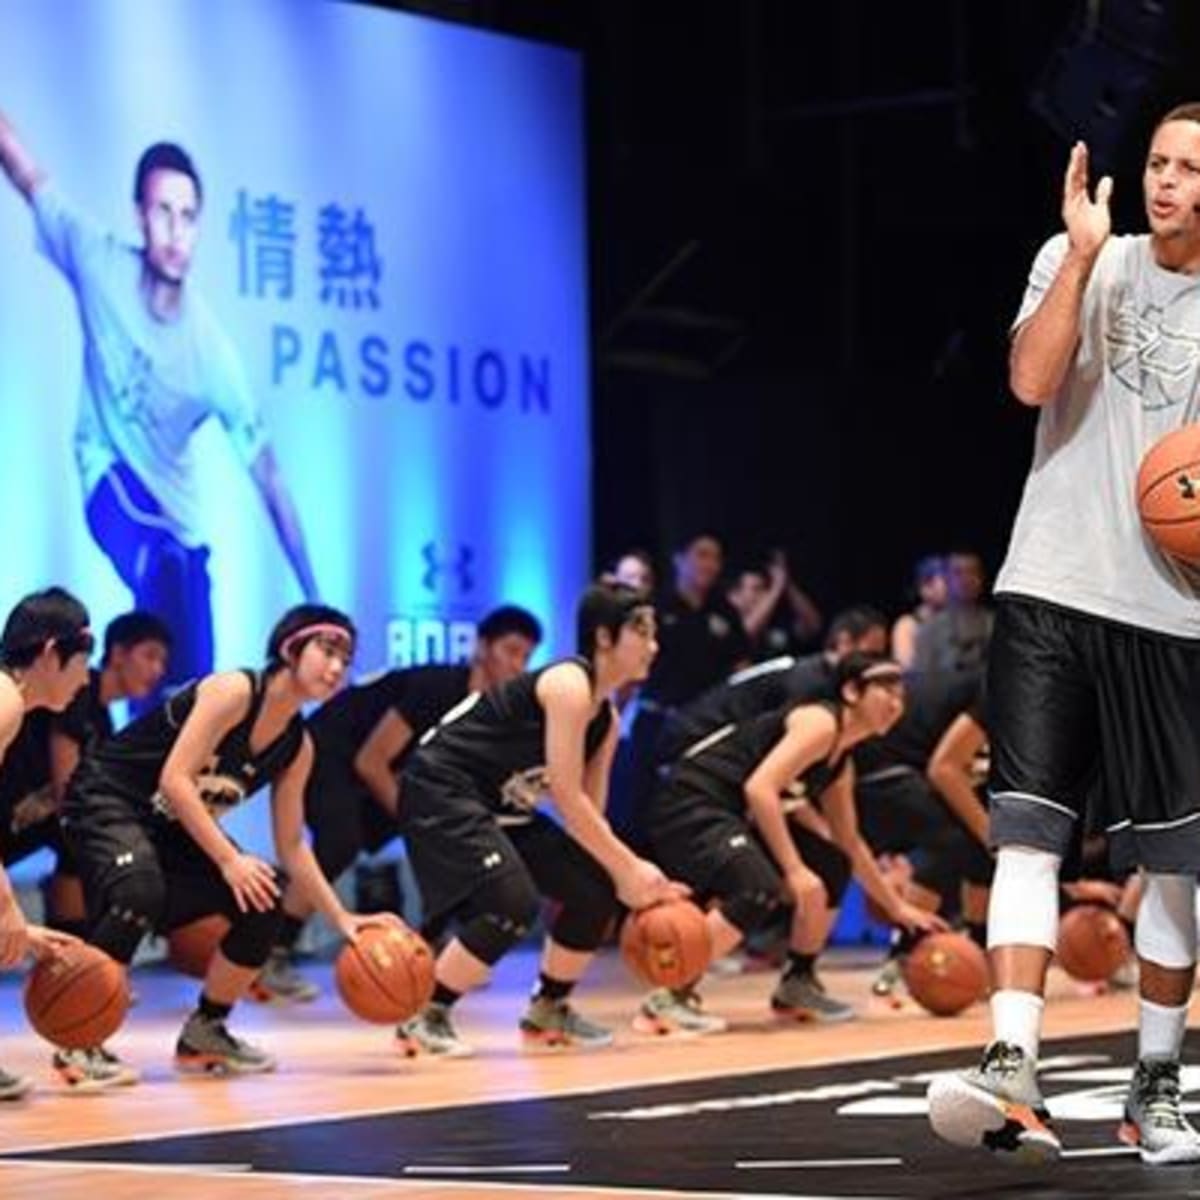 Under Armour Is Touring China With Nba Phenom Stephen Curry In Bid